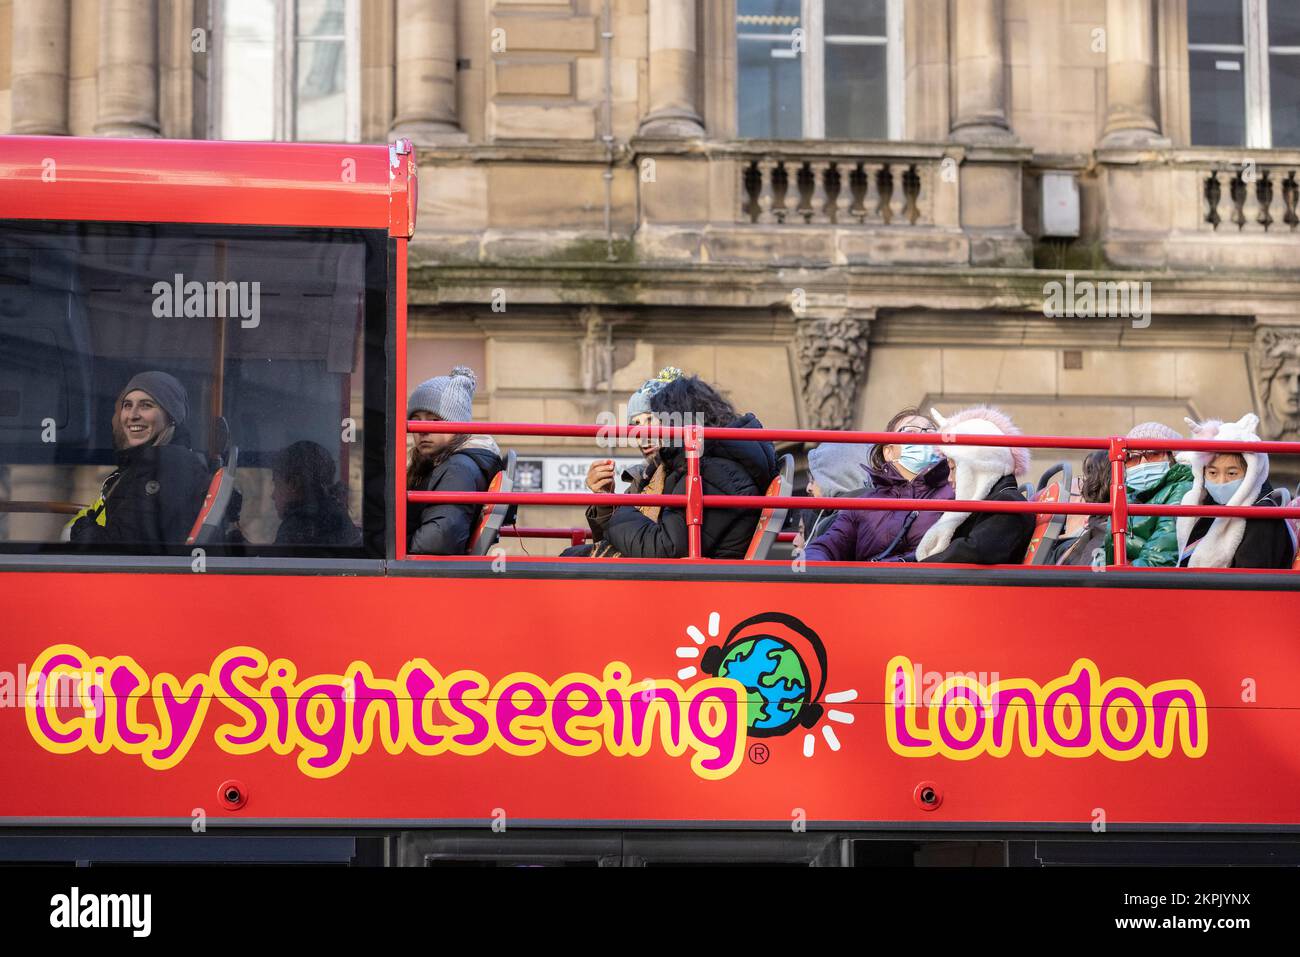 City Sightseeing bus in City of London, filled with tourists as the industry returns to full capacity during this years winter months, London, England Stock Photo